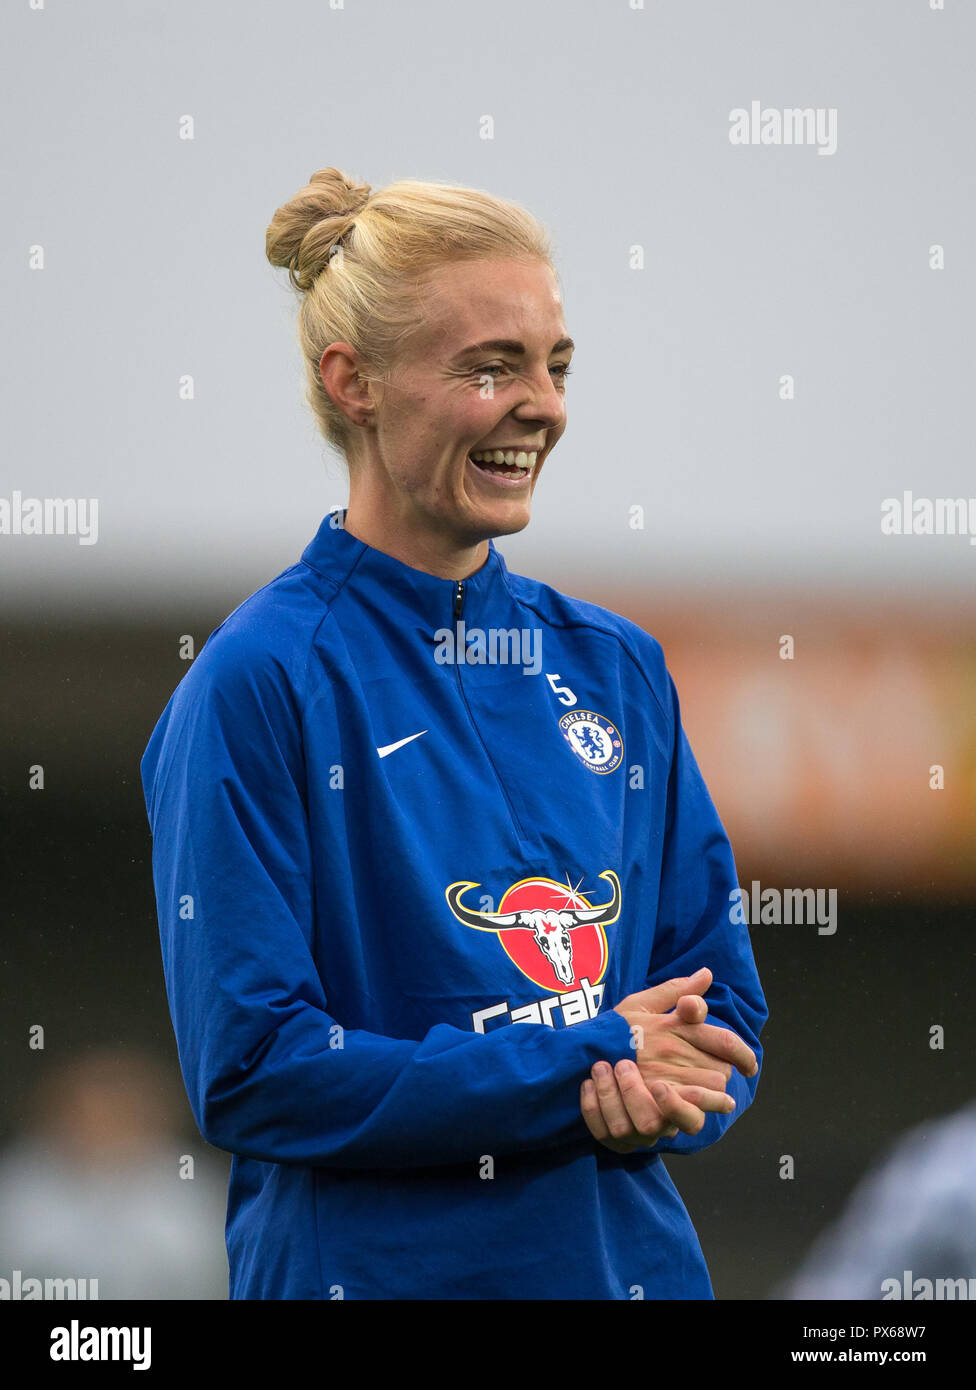 Sophie Ingle of Chelsea pre match during the FAWSL match between Chelsea Ladies and Arsenal Ladies at the Cherry Red Records Stadium, Kingston, Englan Stock Photo